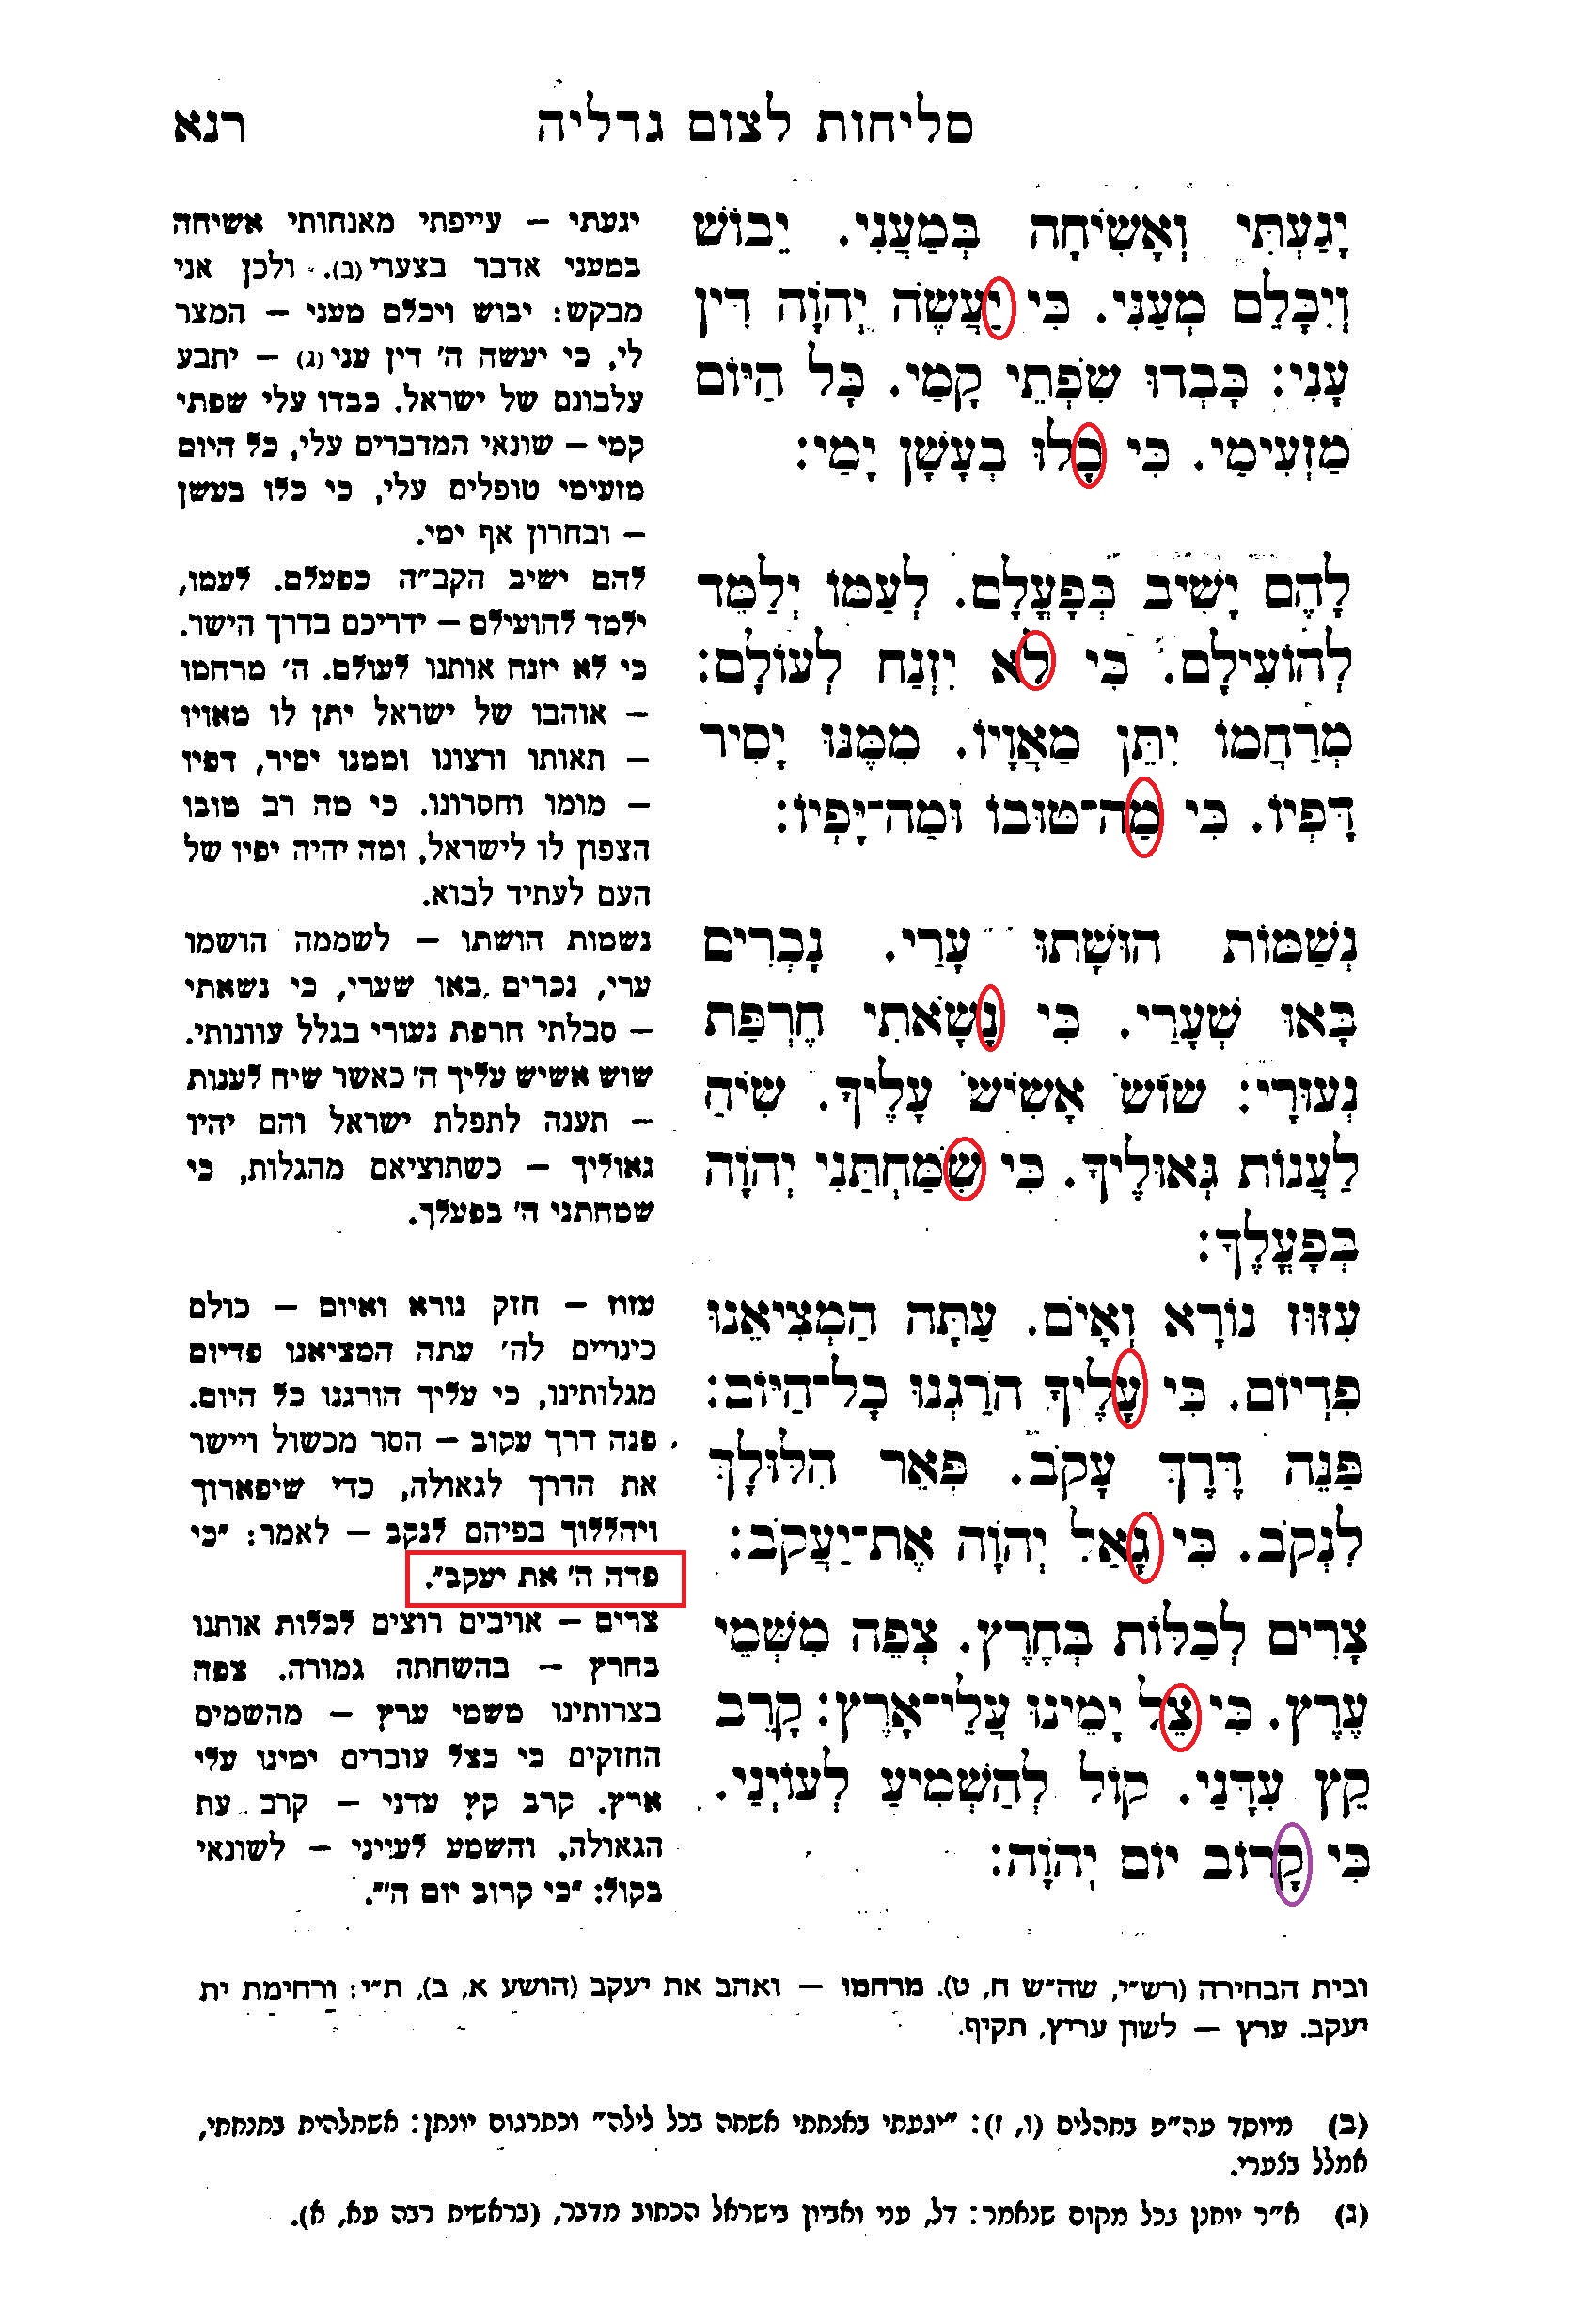 Pages from Hebrewbooks_org_49921.jpg